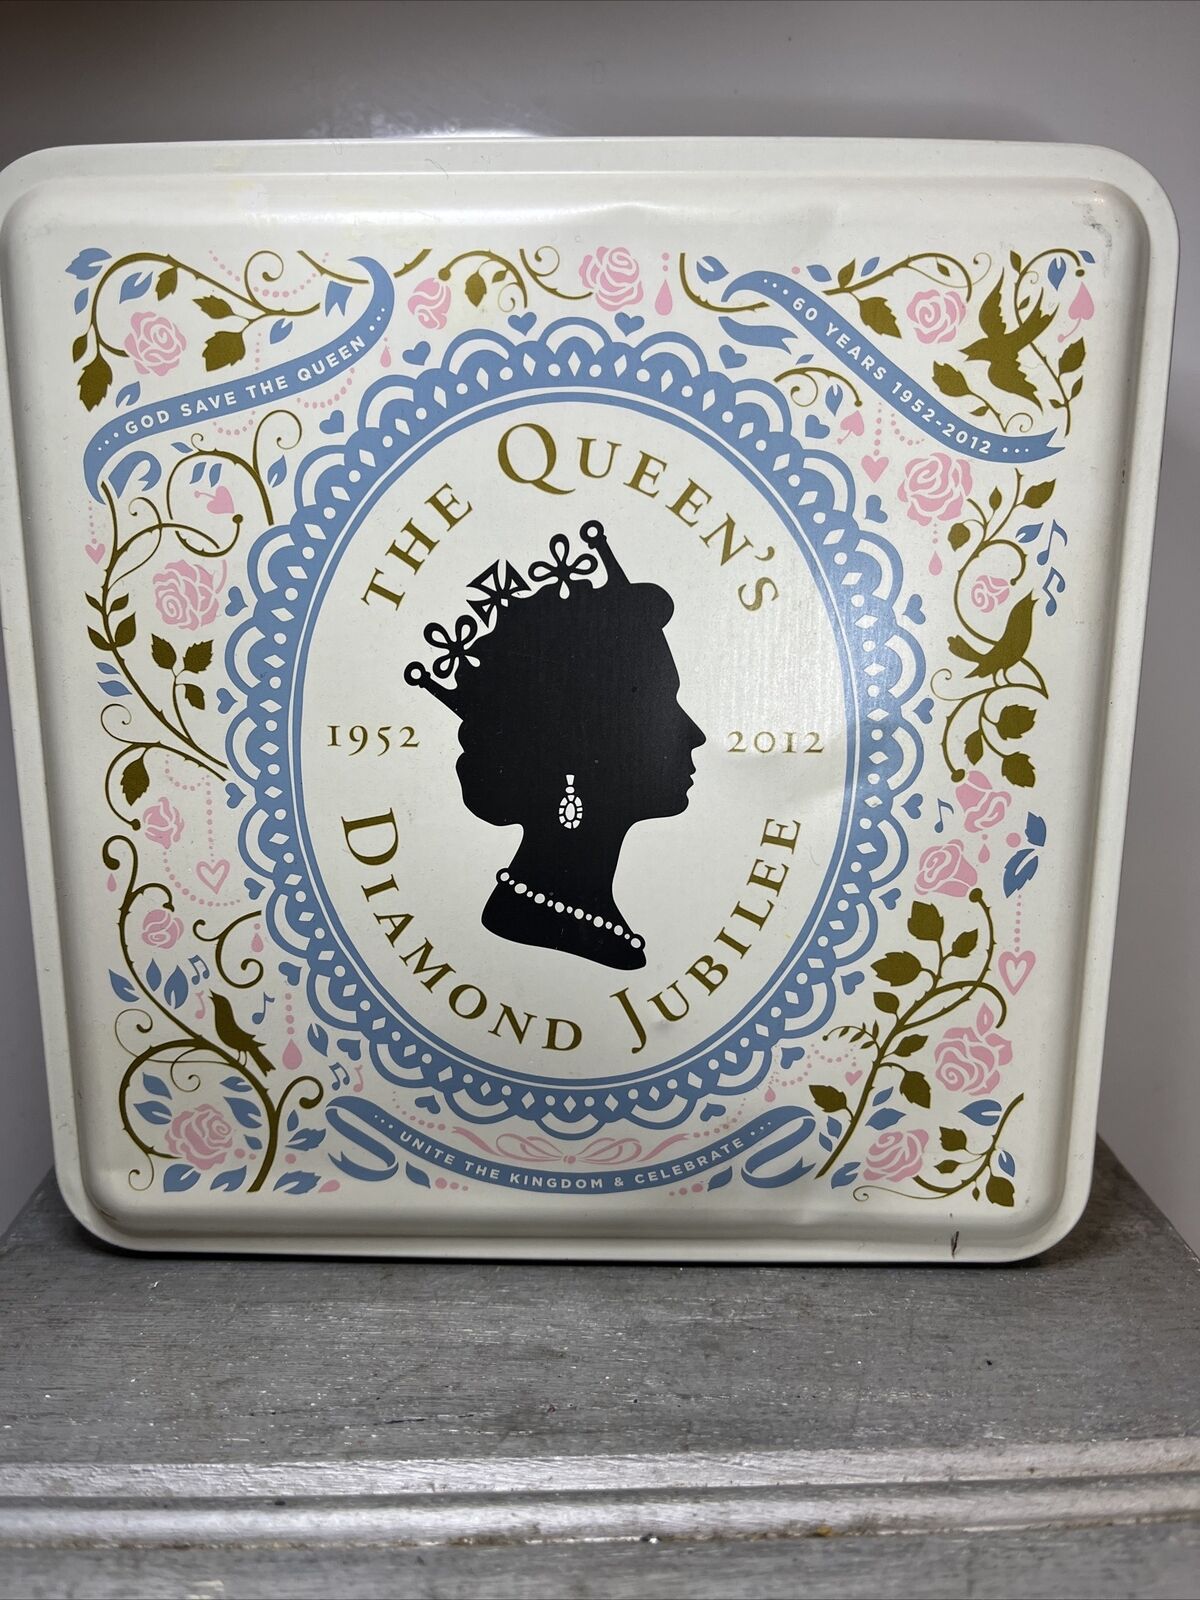 The Queen's Diamond Jubilee 2012 EMPTY Collectable Tin Container Display